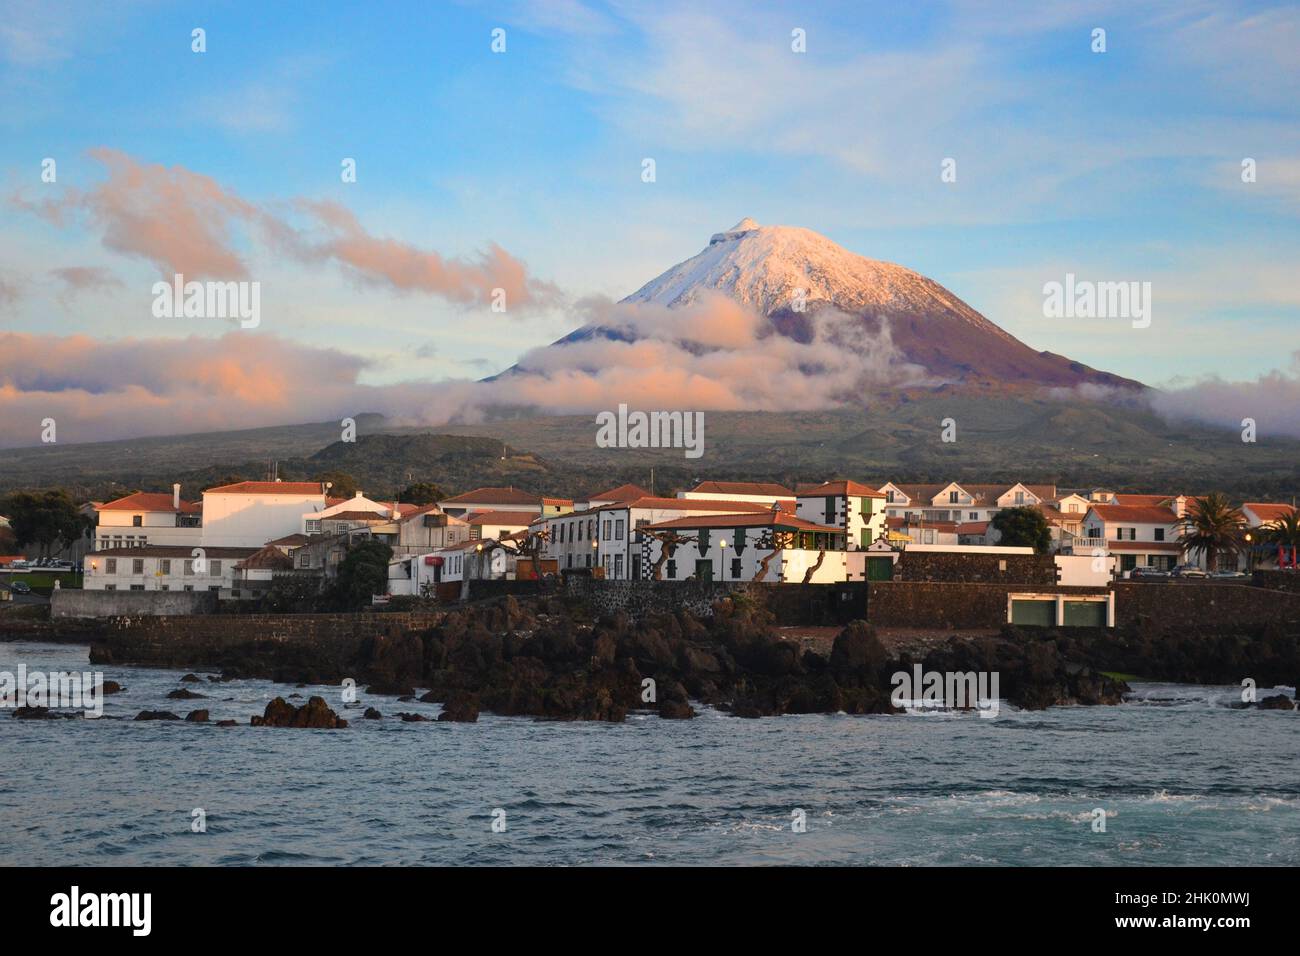 The highest mountain of Portugal, the Azores volcano Montanha do Pico on the island of Pico at sunset, village Madalena Stock Photo